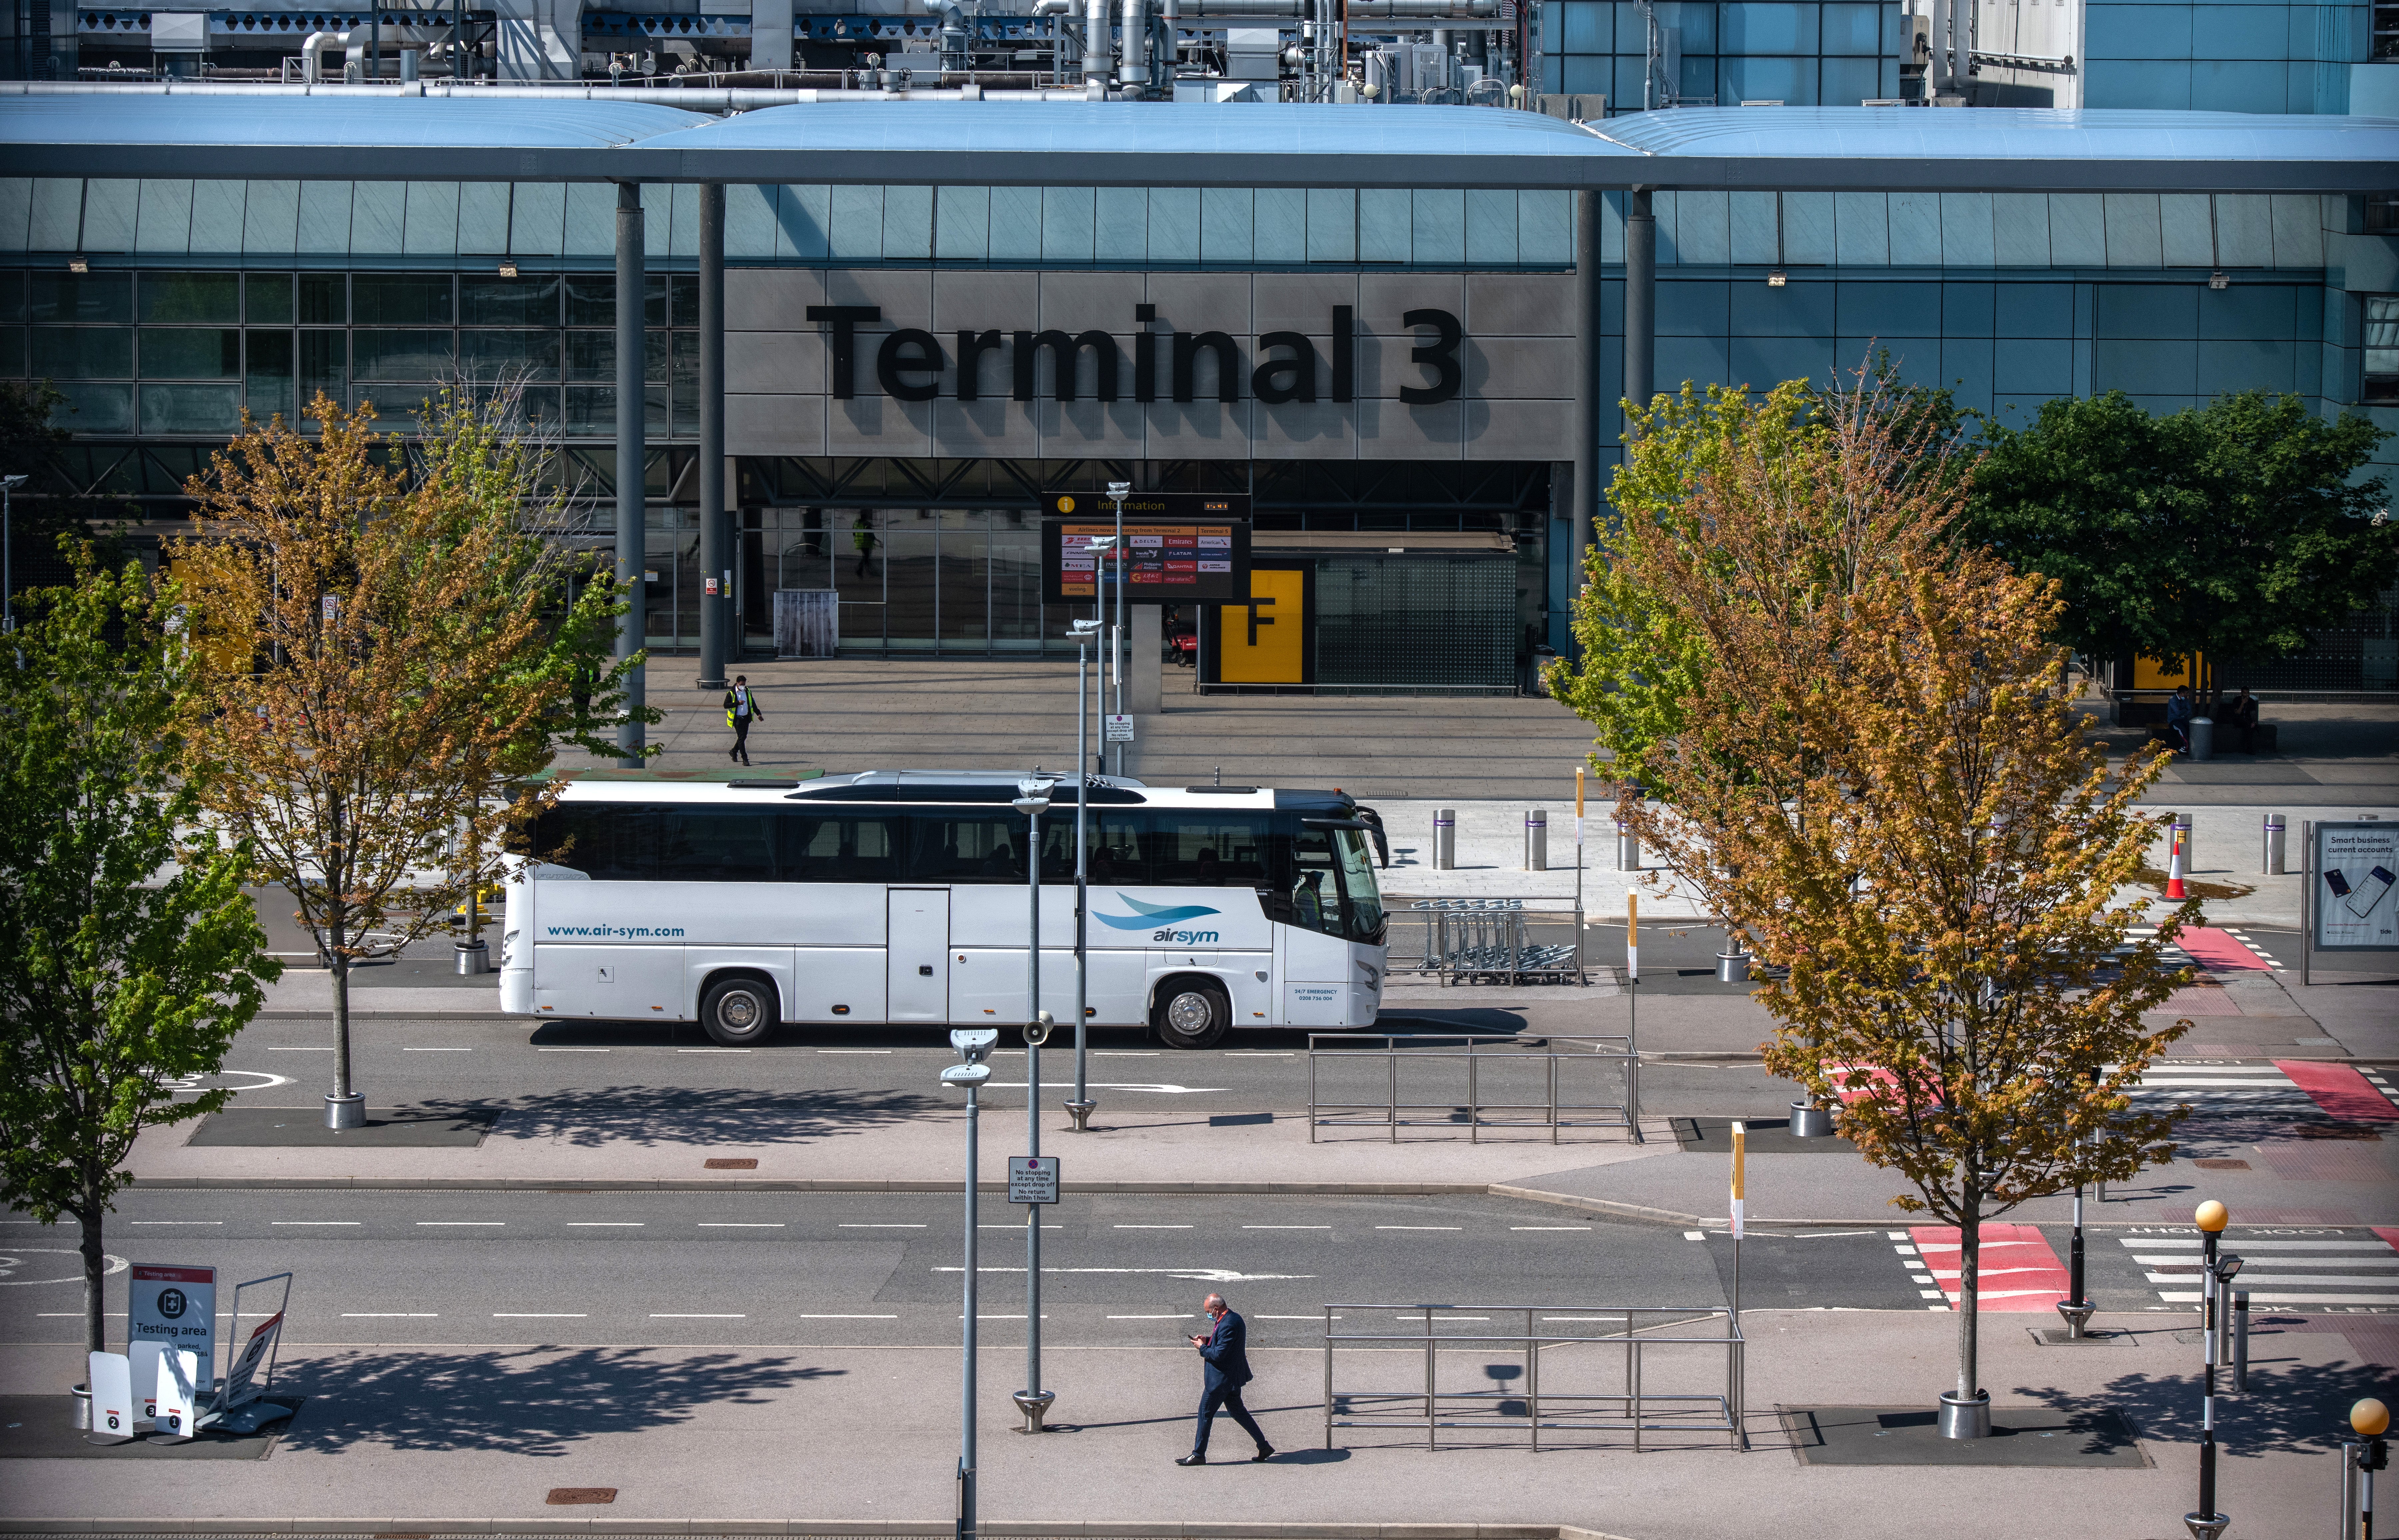 A bus used to transport red list arriving airline passengers passes the Terminal 3 building at Heathrow Airport